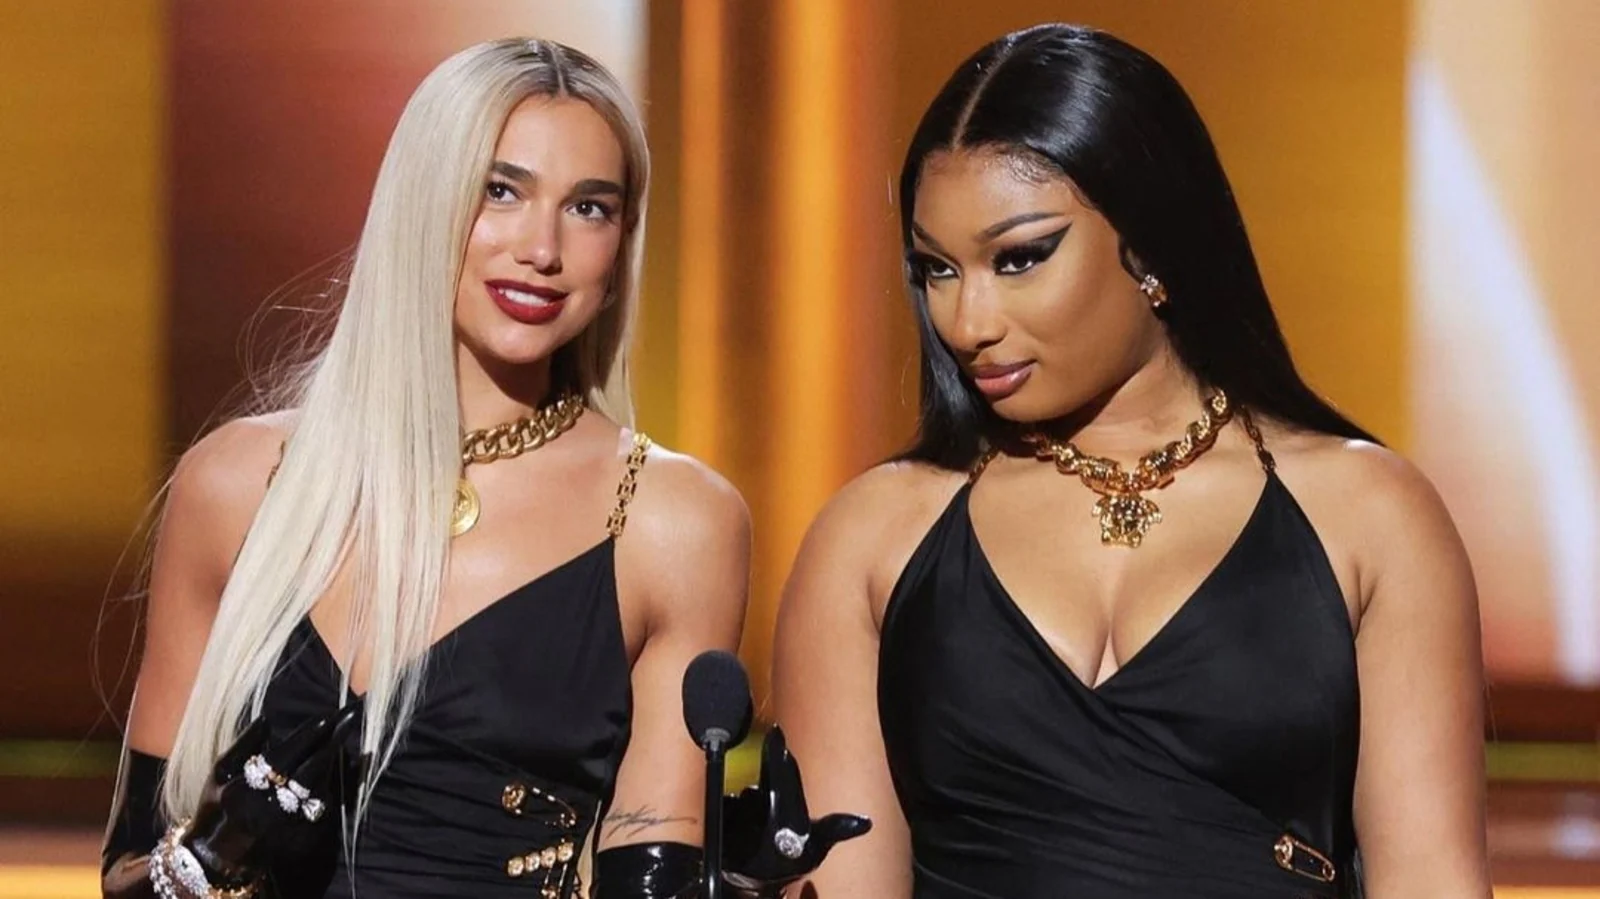 Dua Lipa and Megan Thee Stallion wore matching Versace looks at Grammys: Watch viral video to see what happened